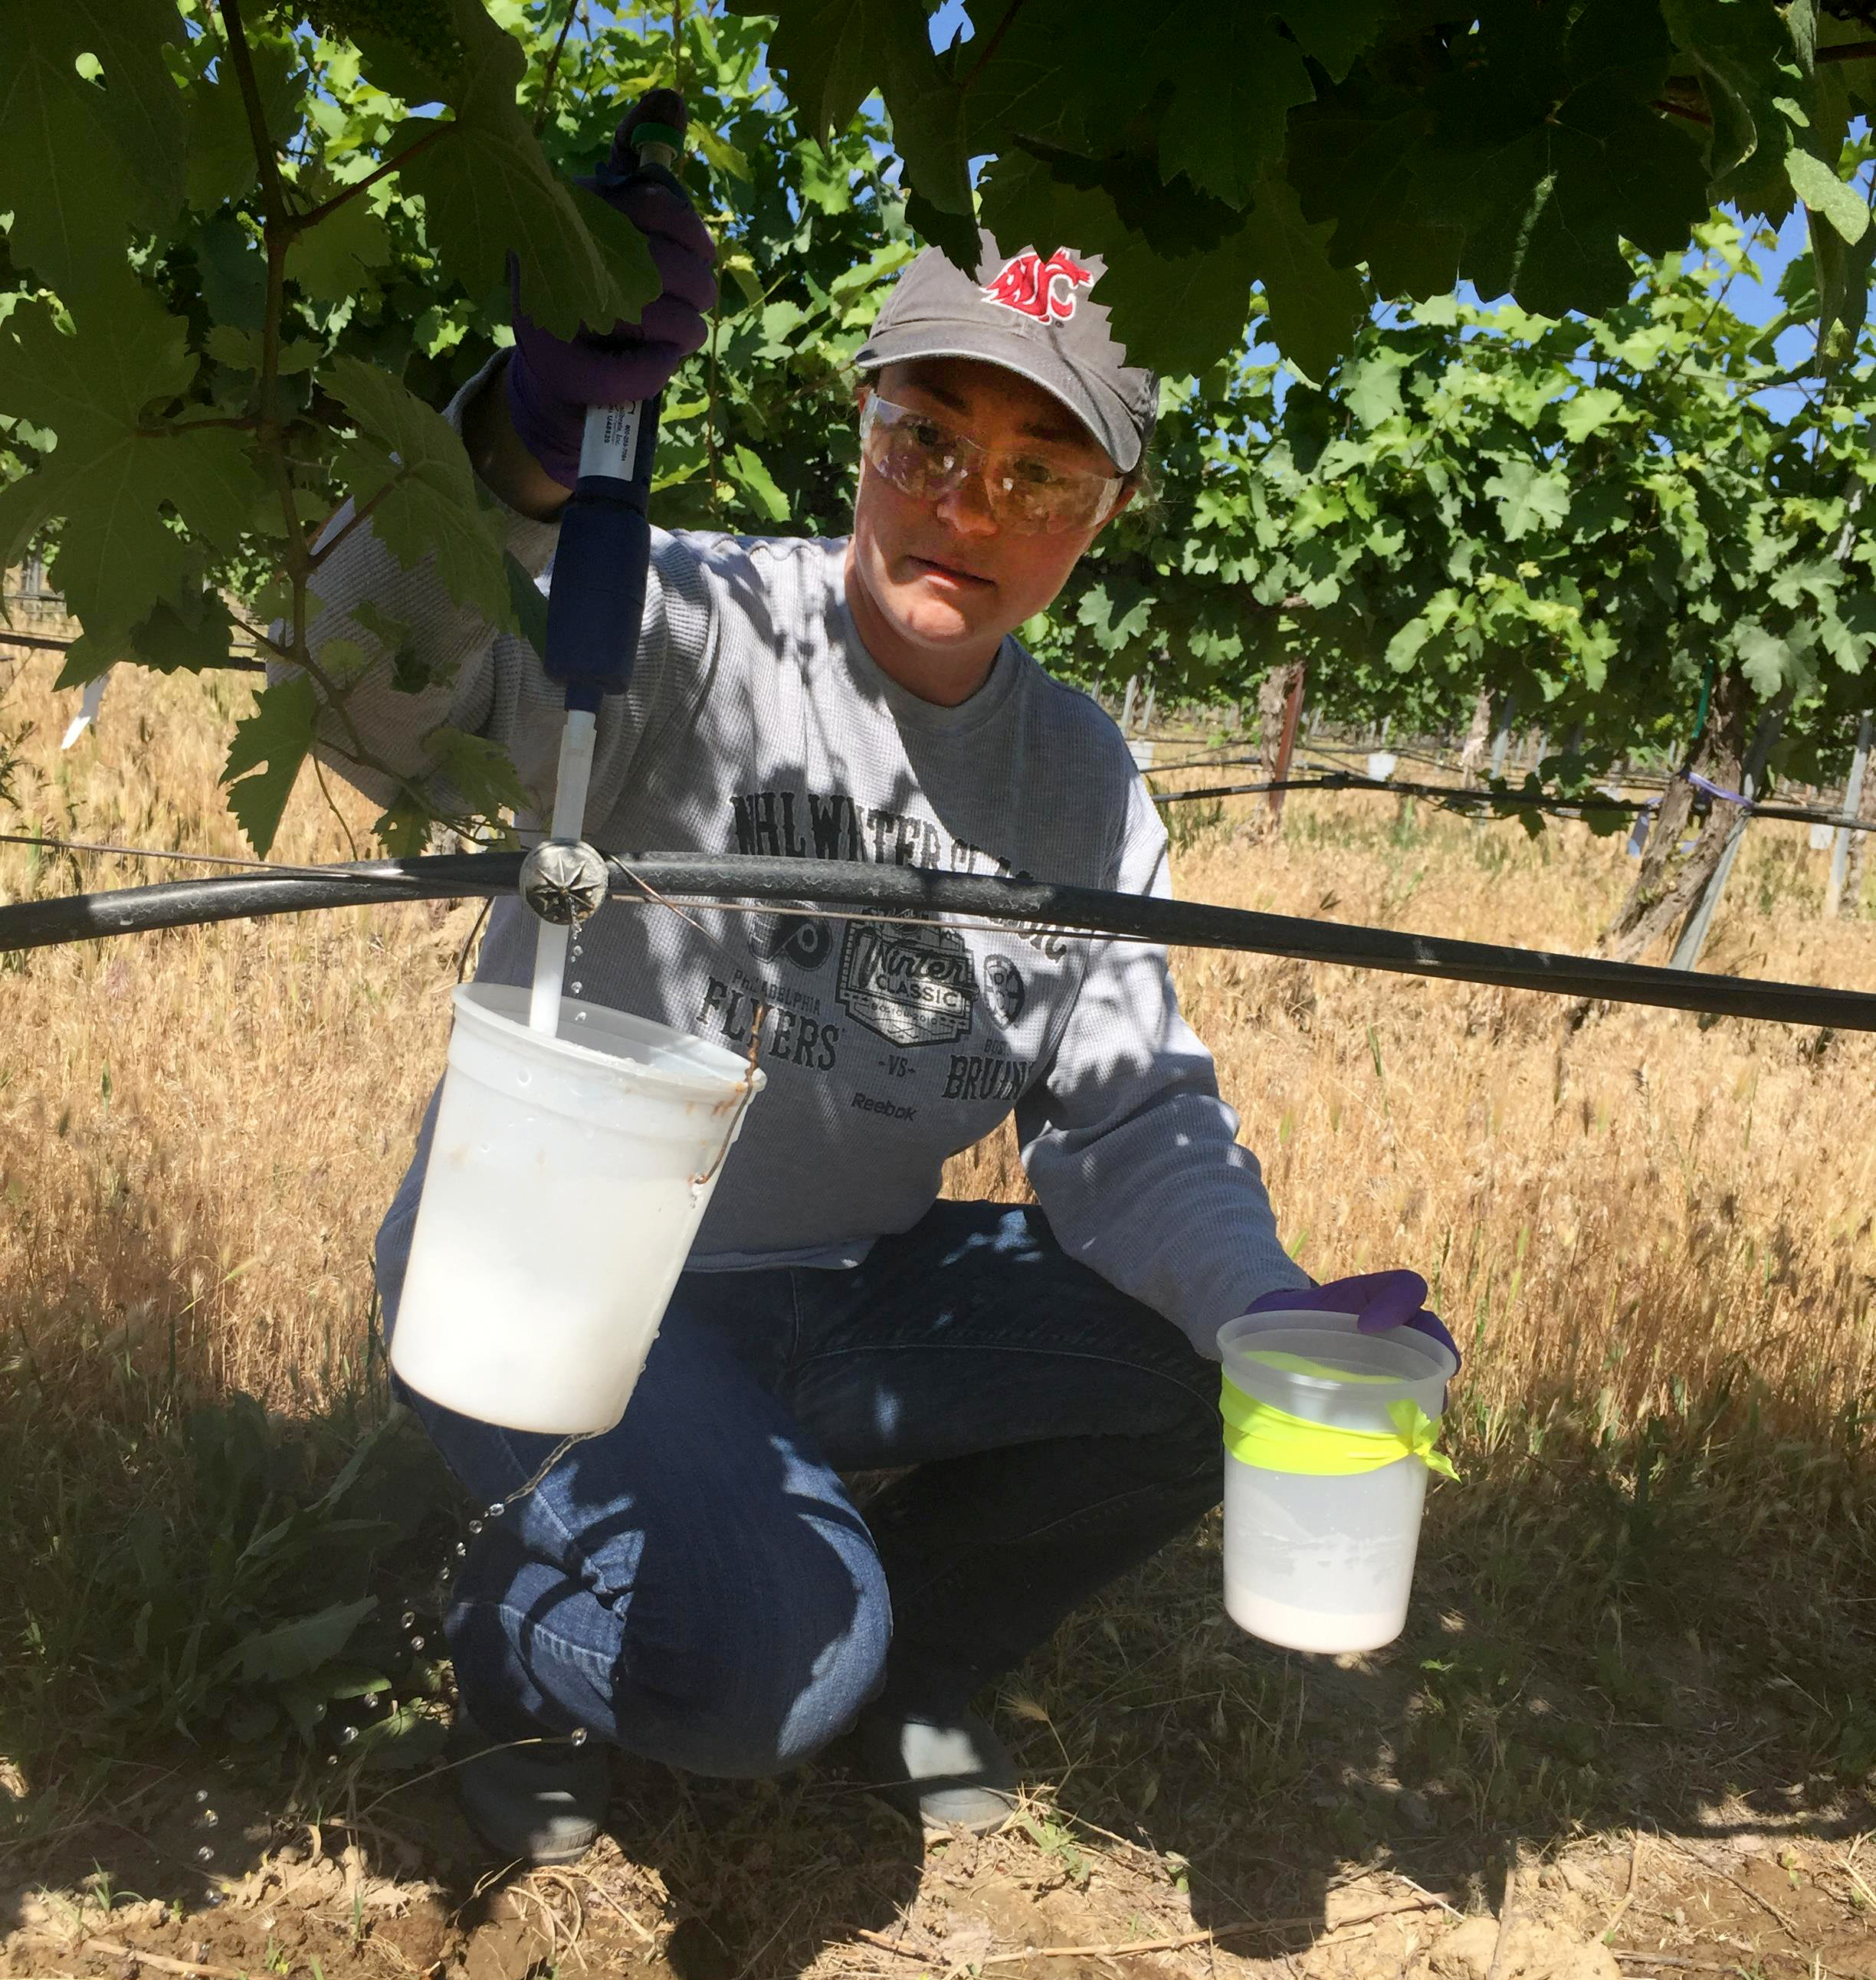 Katherine East applying nematicides in a vineyard trial